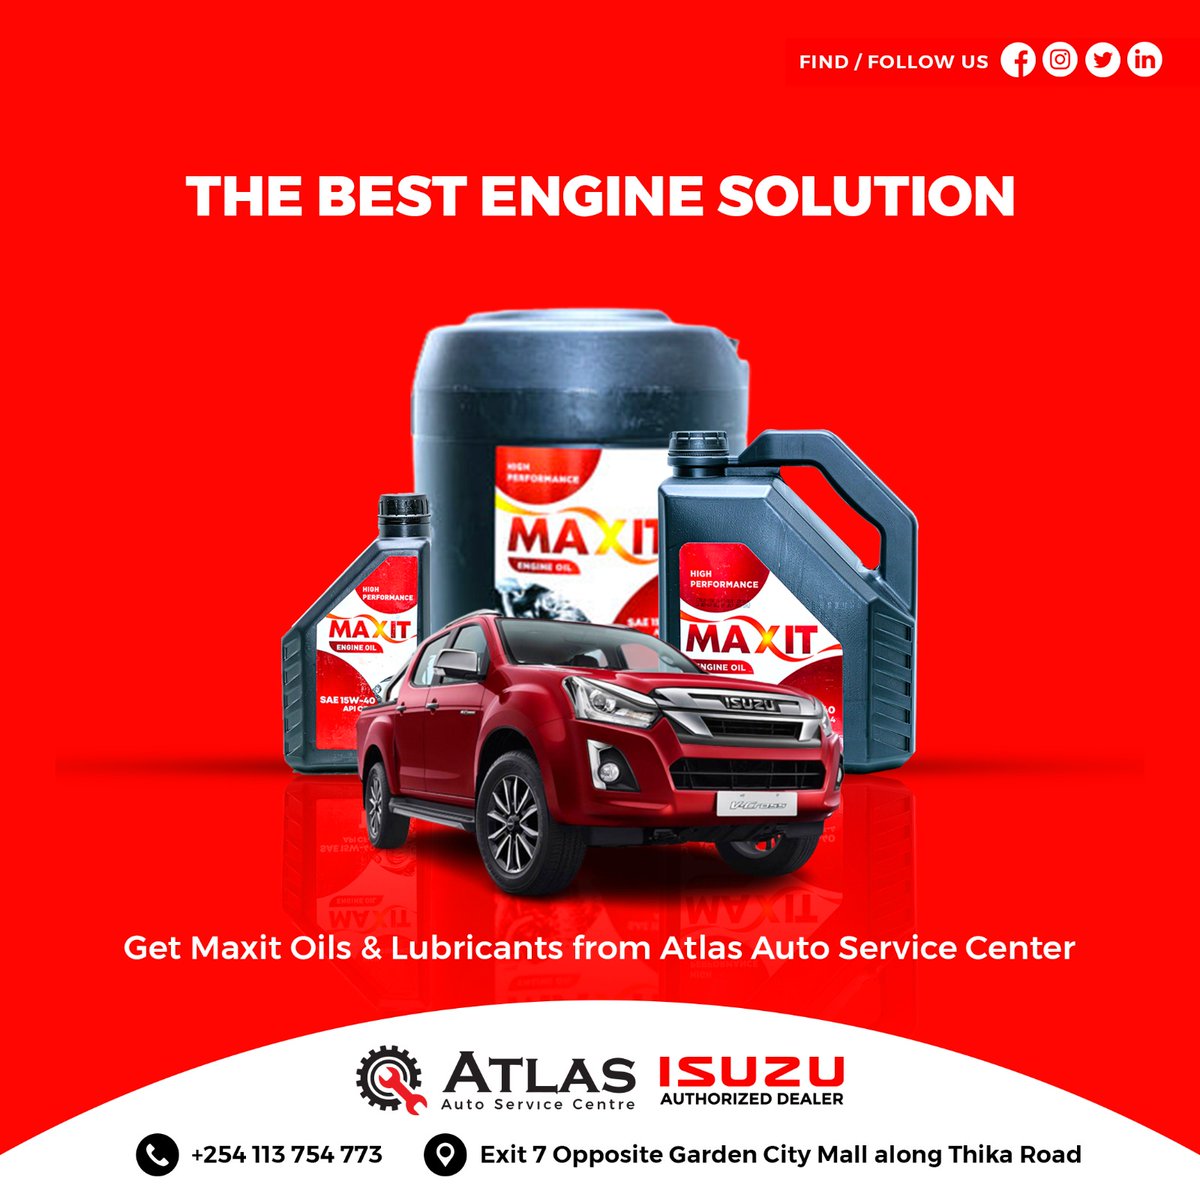 The best engine solution is here! 🚗✨ Get MAXIT oil & lubricant from Atlas Auto Service Centre. Because your engine deserves the finest care. Drive with MAXIT power! #howcanwehelp #MaxitOil #EngineCare #AtlasAutoService #Mpesa #charlesouda #tuskys